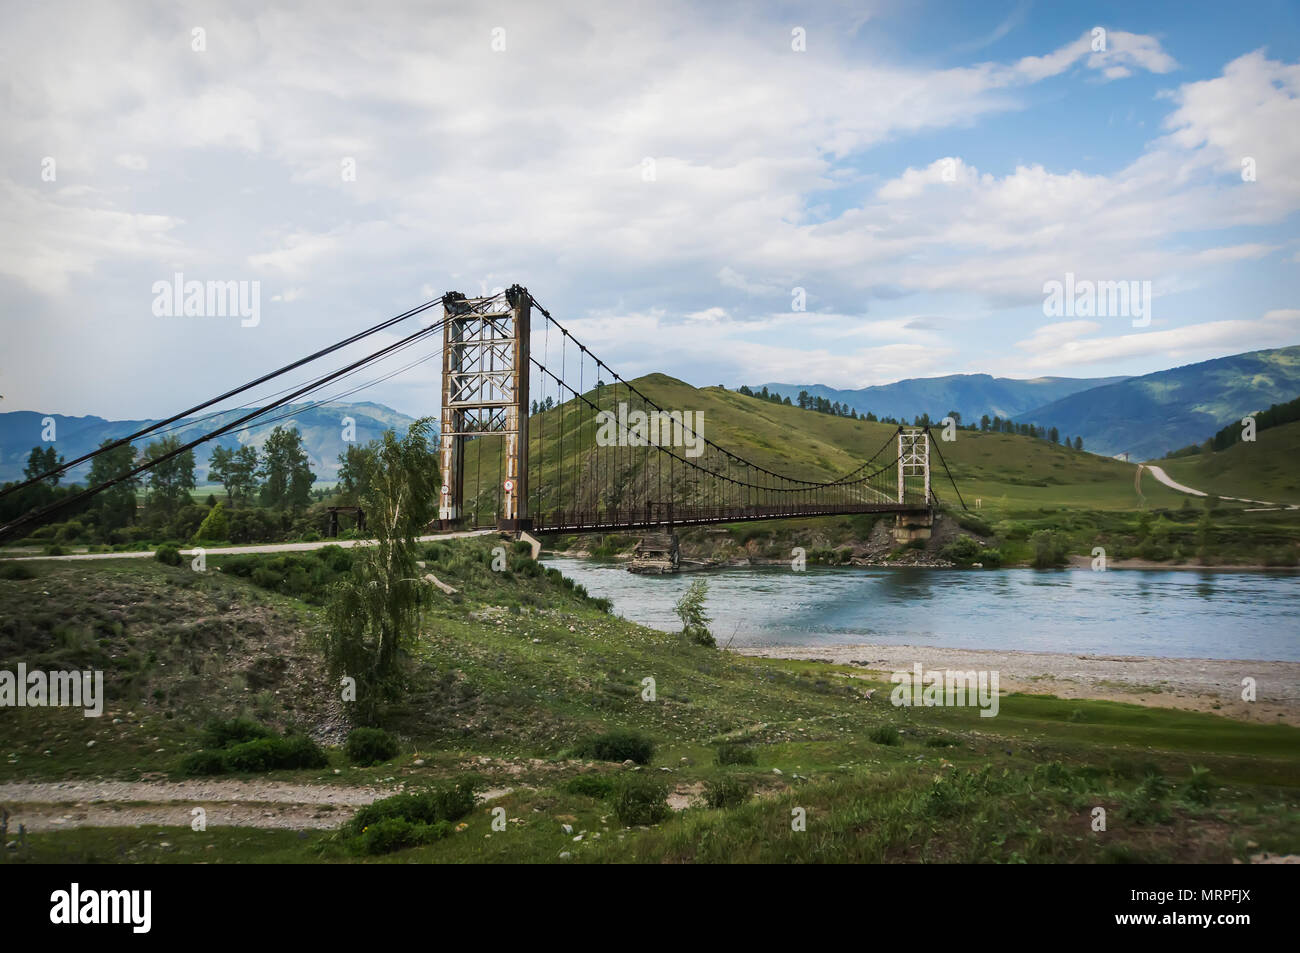 wooden suspension bridge over a mountain river high in the mountains of Altai. Stock Photo